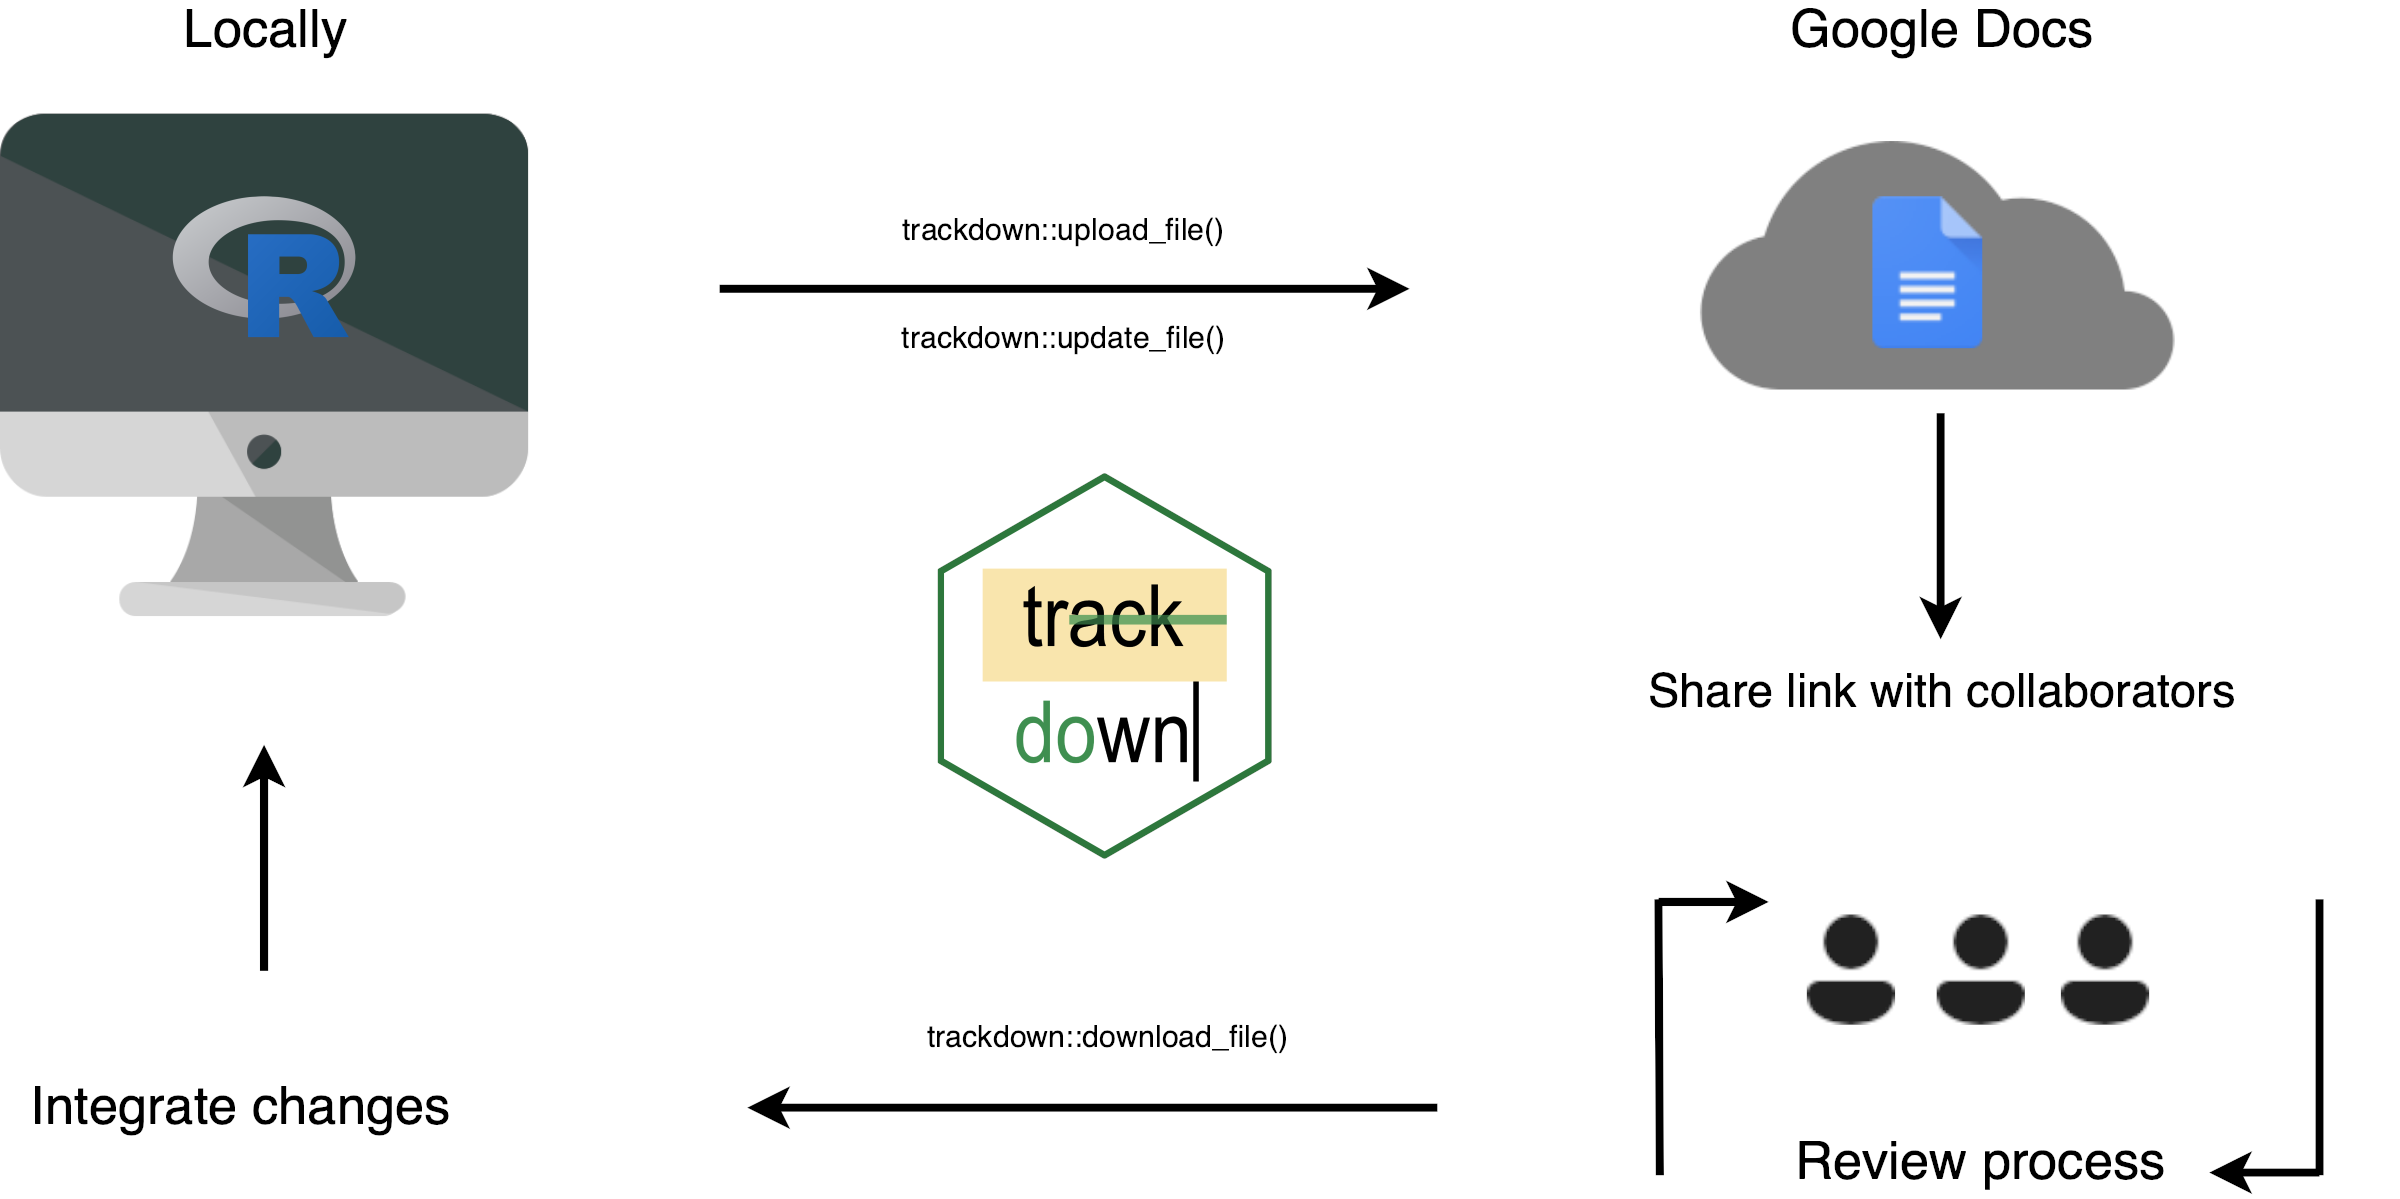 Chart trackdown workflow: upload the file to Google Docs, share the file with cllaborators for reviewing/editing, download the file to integrate the changes